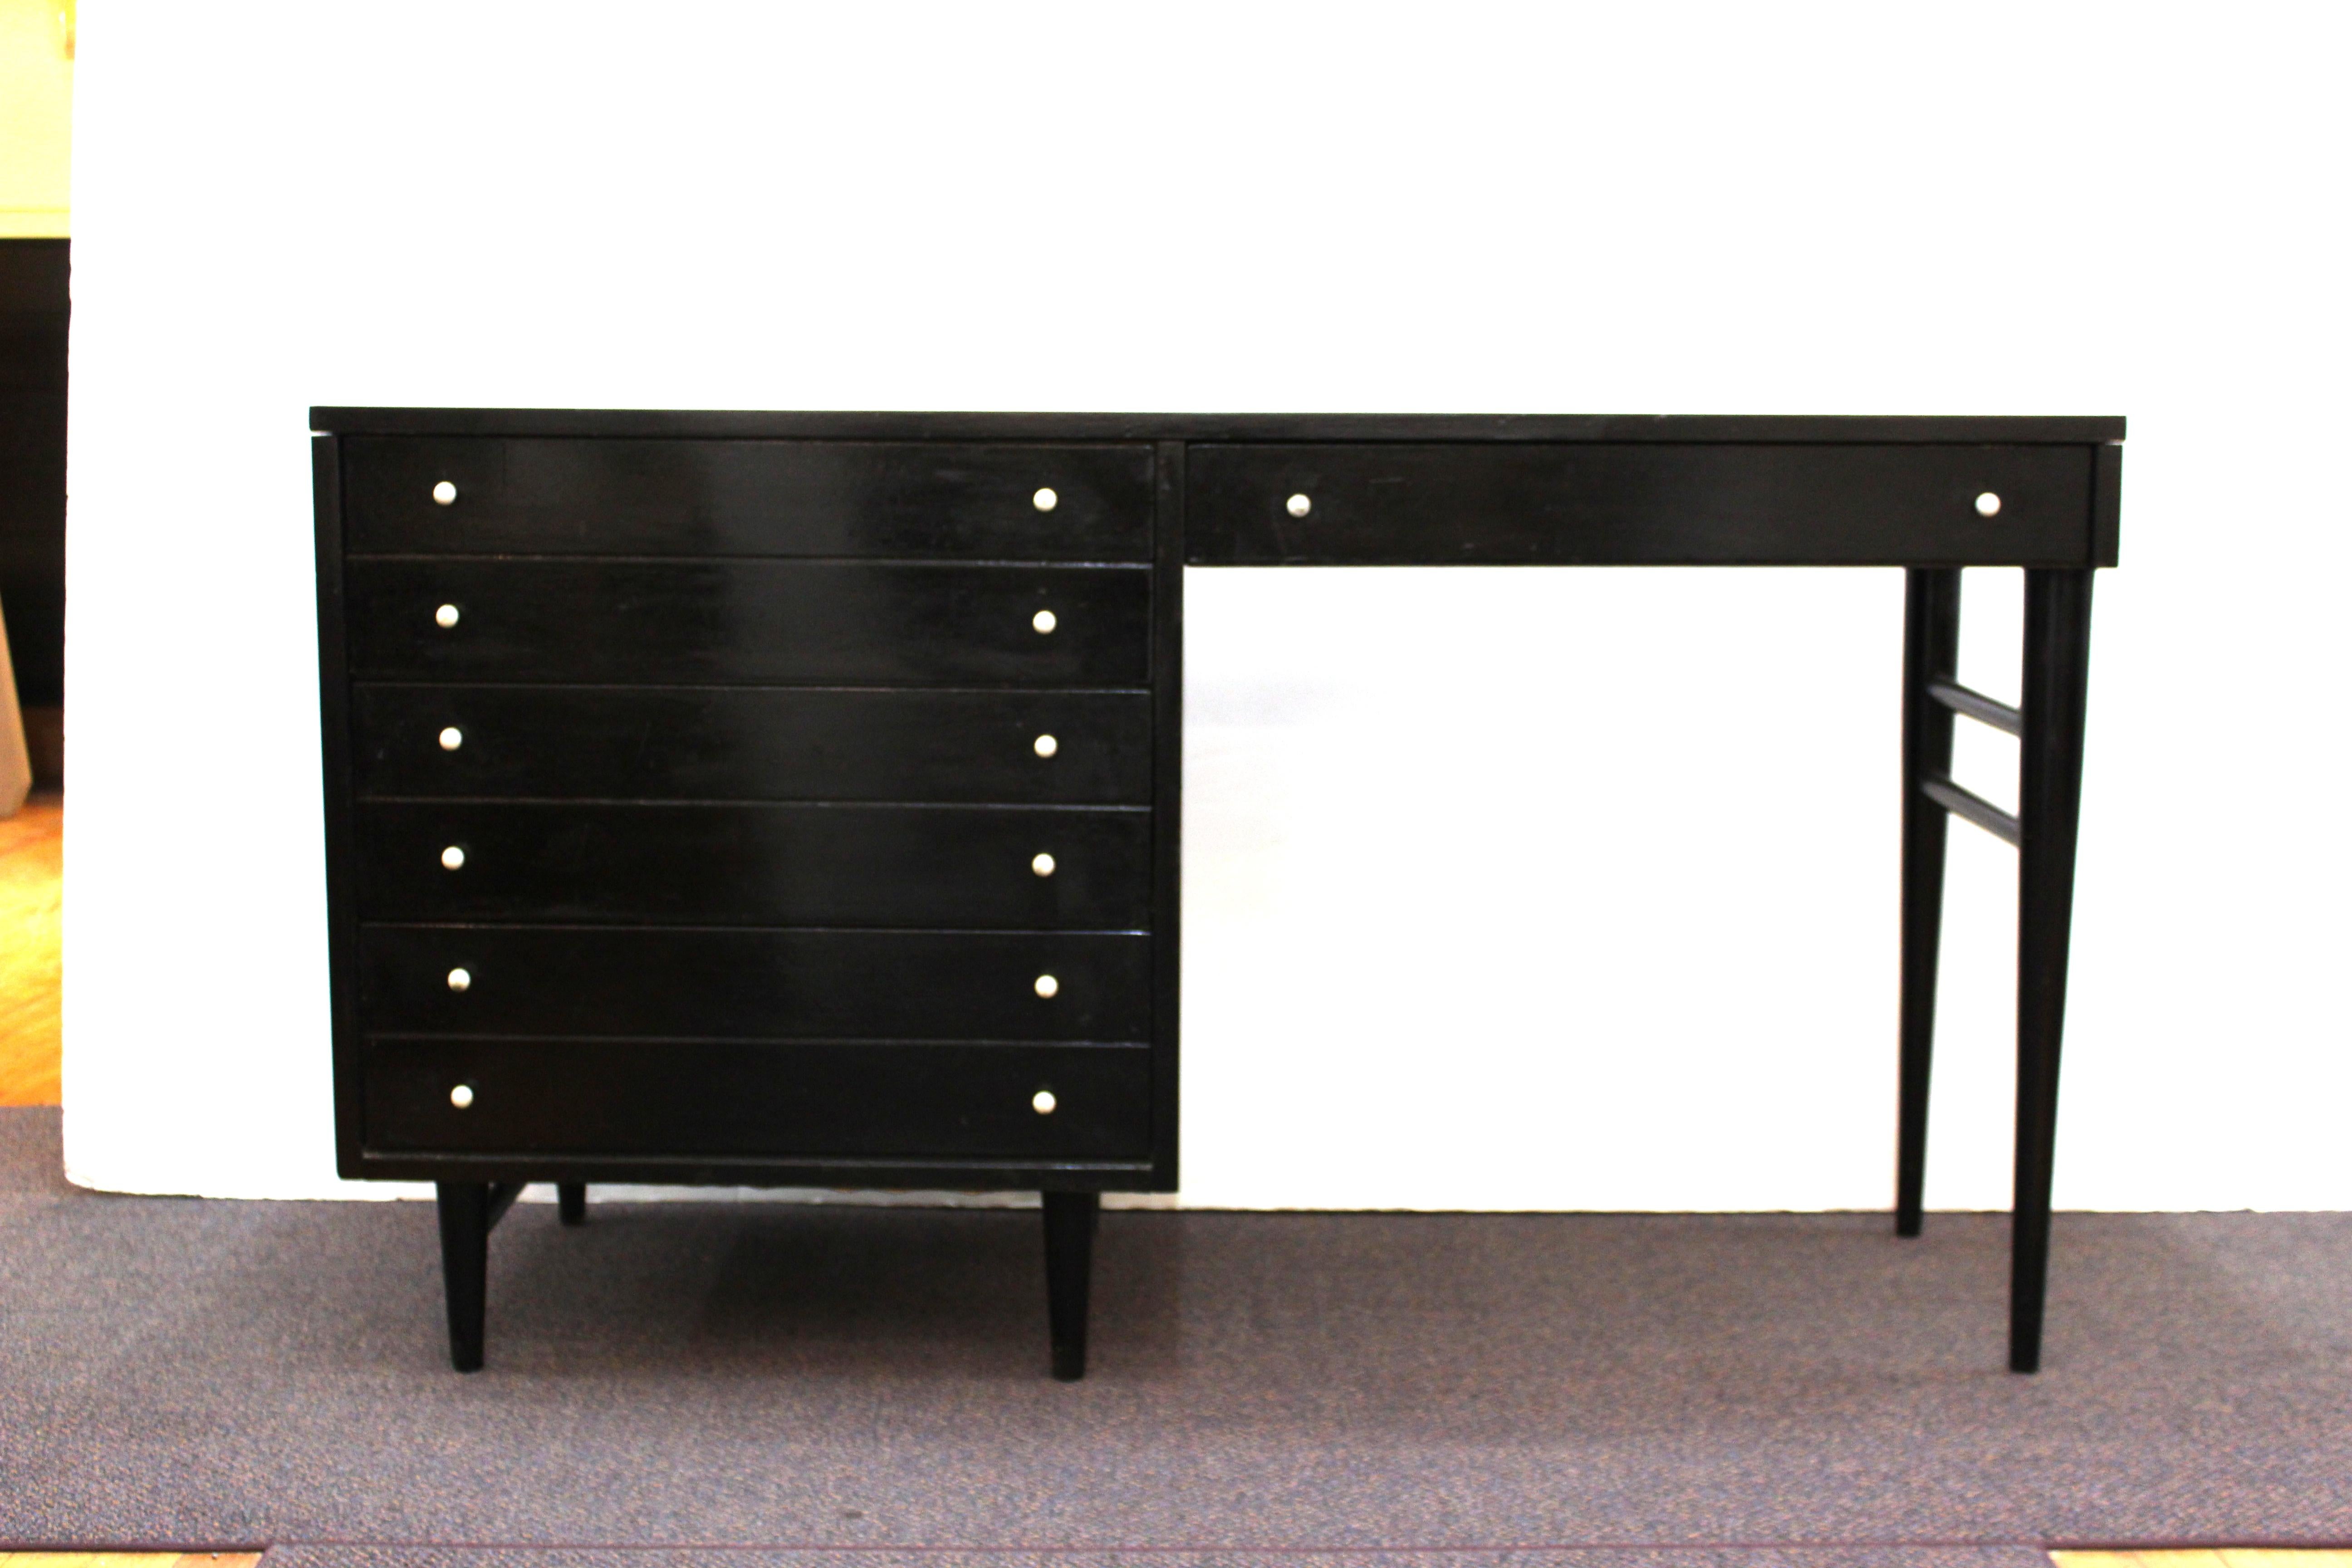 Mid-Century Modern black lacquered writing desk by American of Martinsville, with white Formica top. The piece was made in the United States during the 1960s and is in great vintage condition with age-appropriate wear and previous old restoration